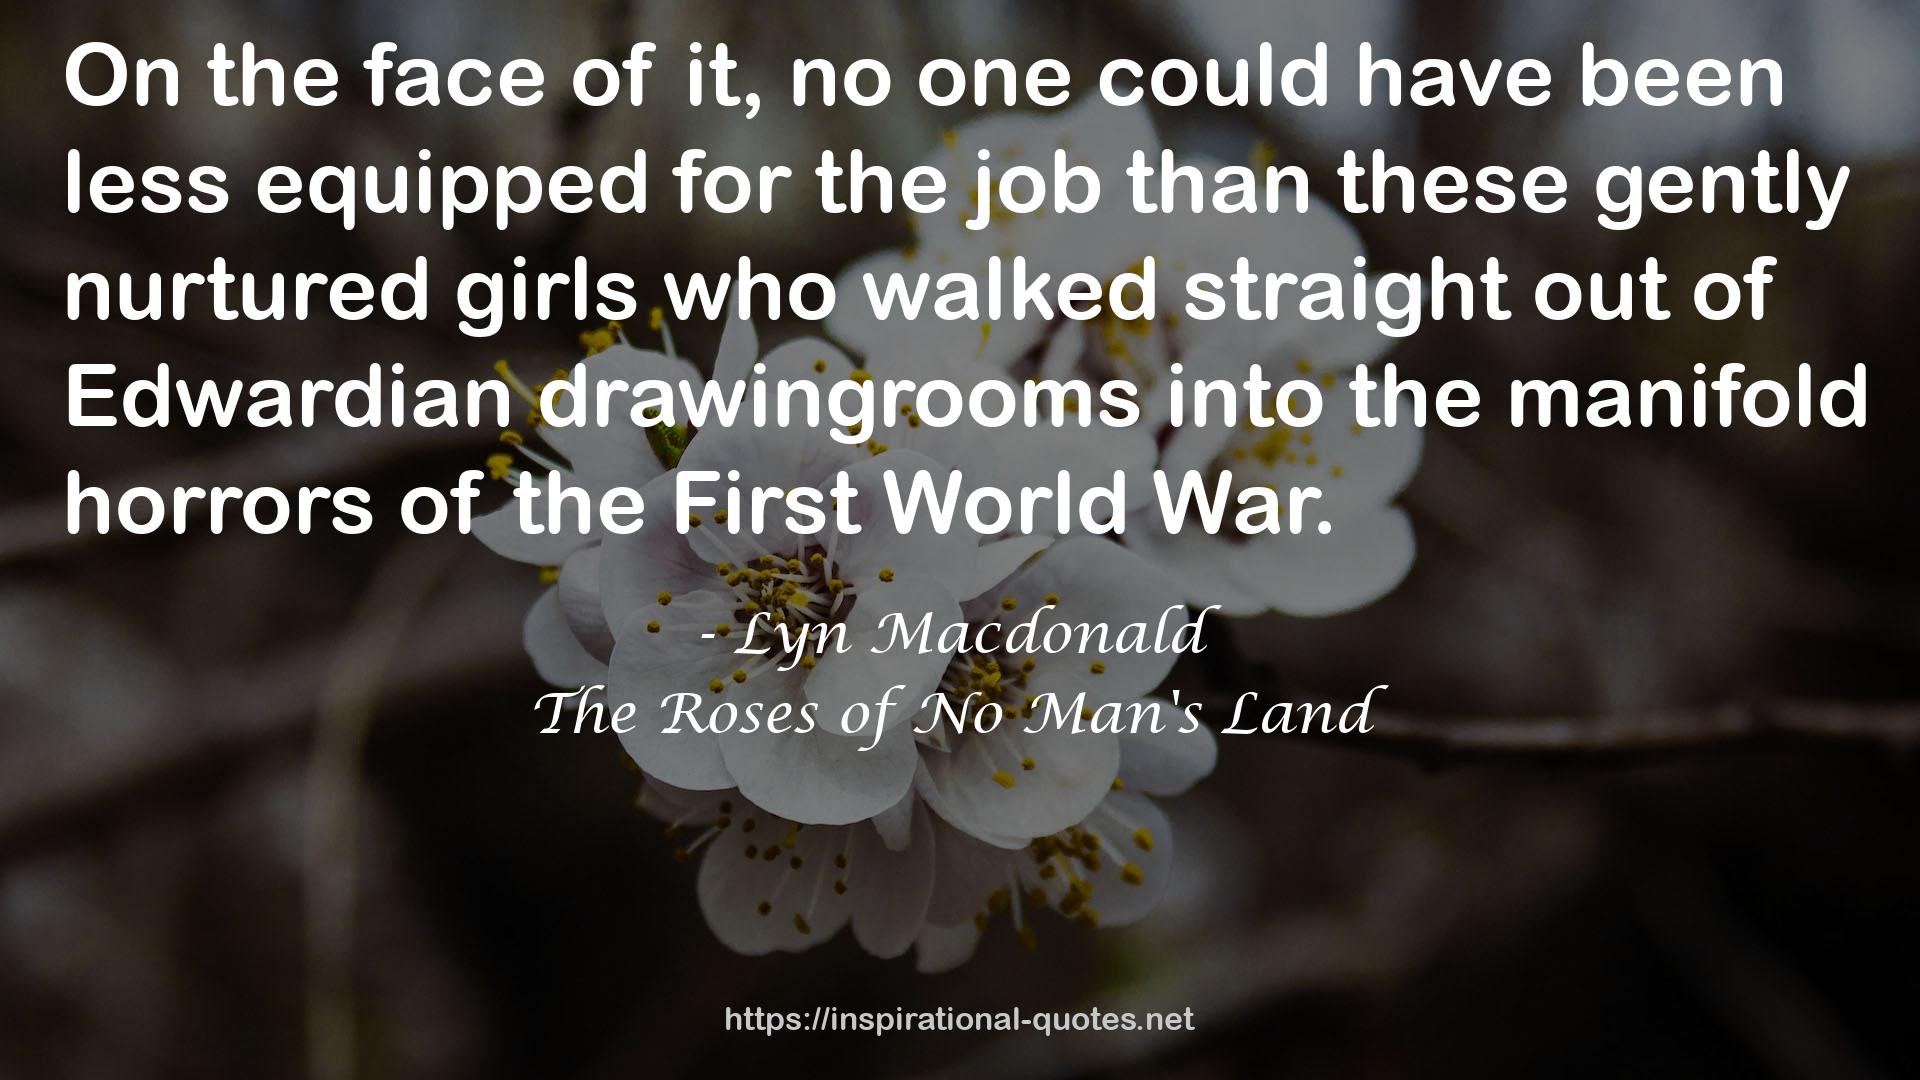 The Roses of No Man's Land QUOTES